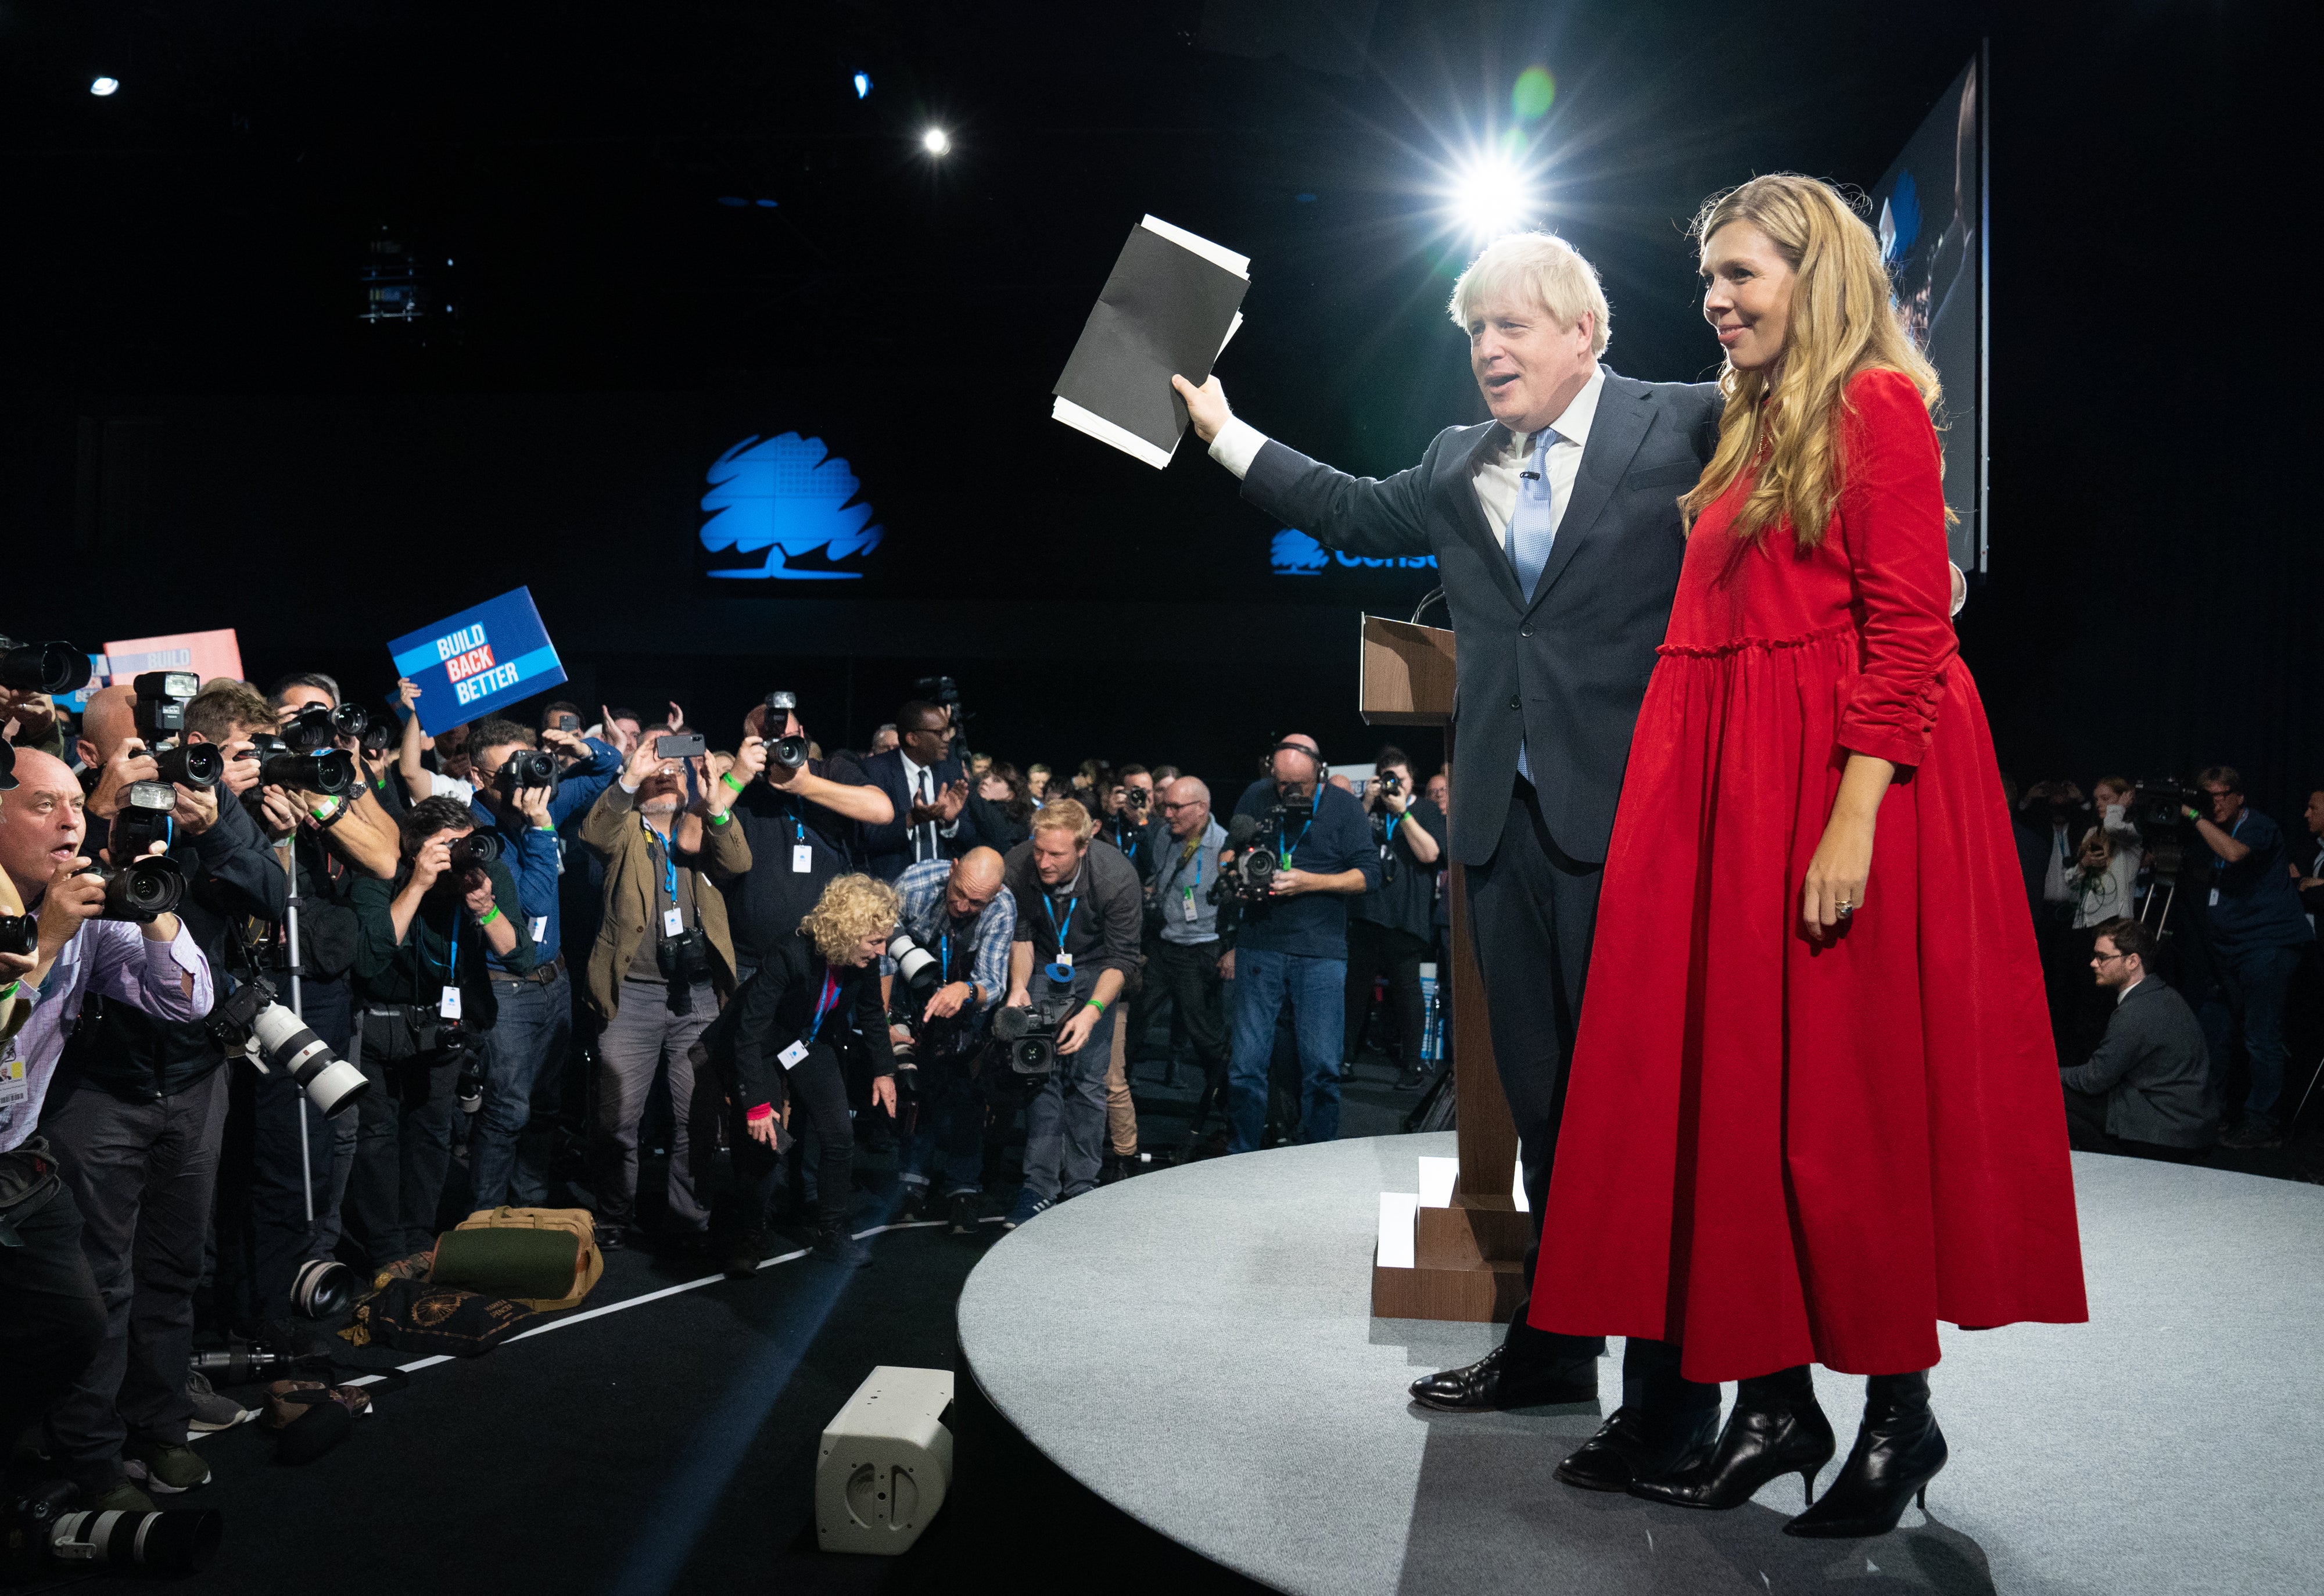 Prime Minister Boris Johnson is joined by his wife Carrie on stage after delivering his keynote speech at the Conservative Party conference in Manchester (Stefan Rousseau/PA)